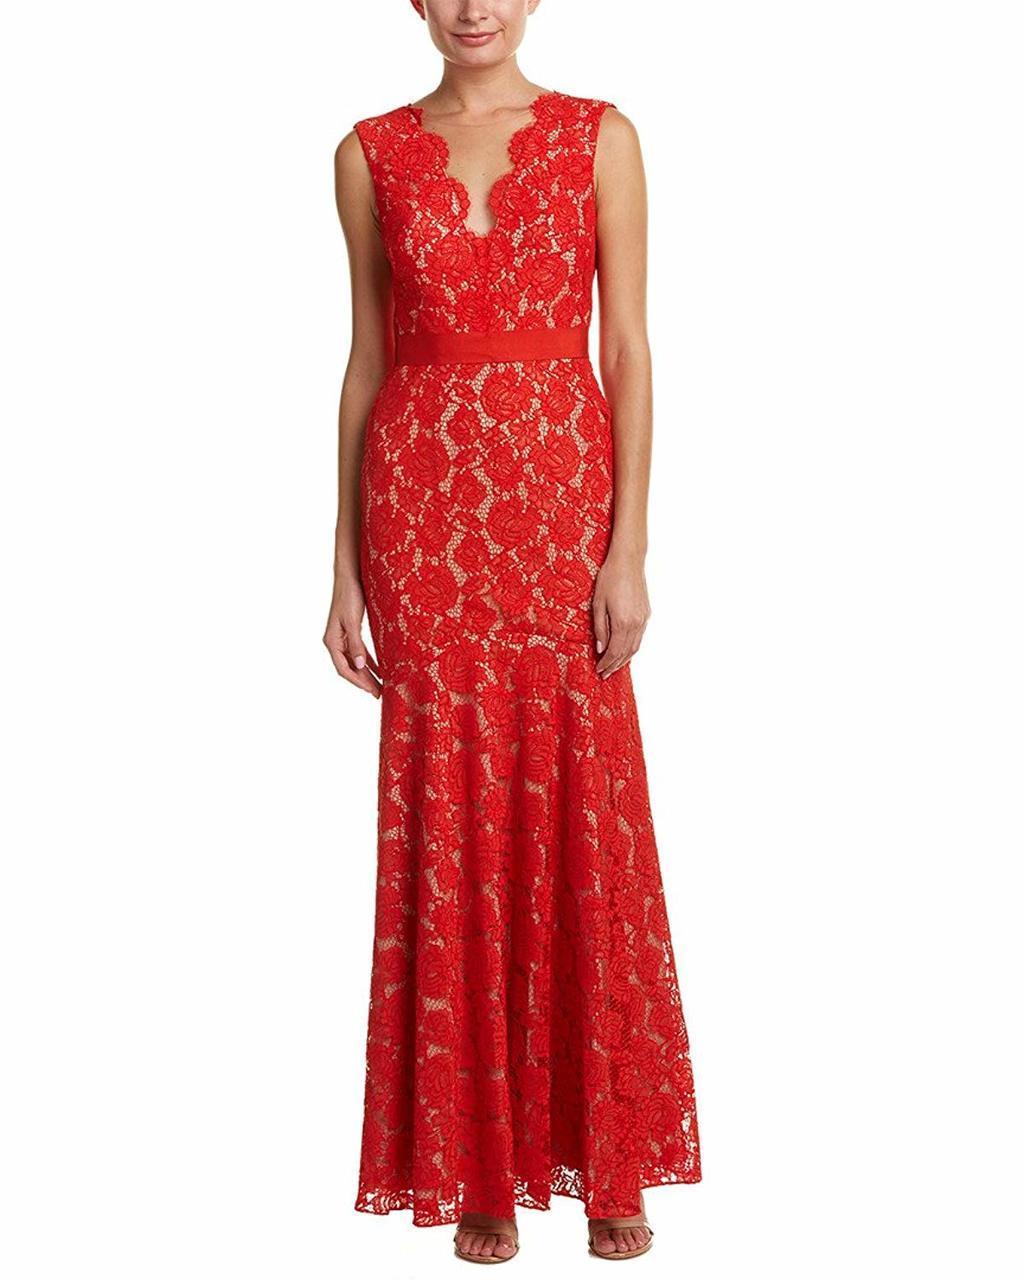 Image of Theia - 883183 Floral Lace Scalloped V-neck Trumpet Dress